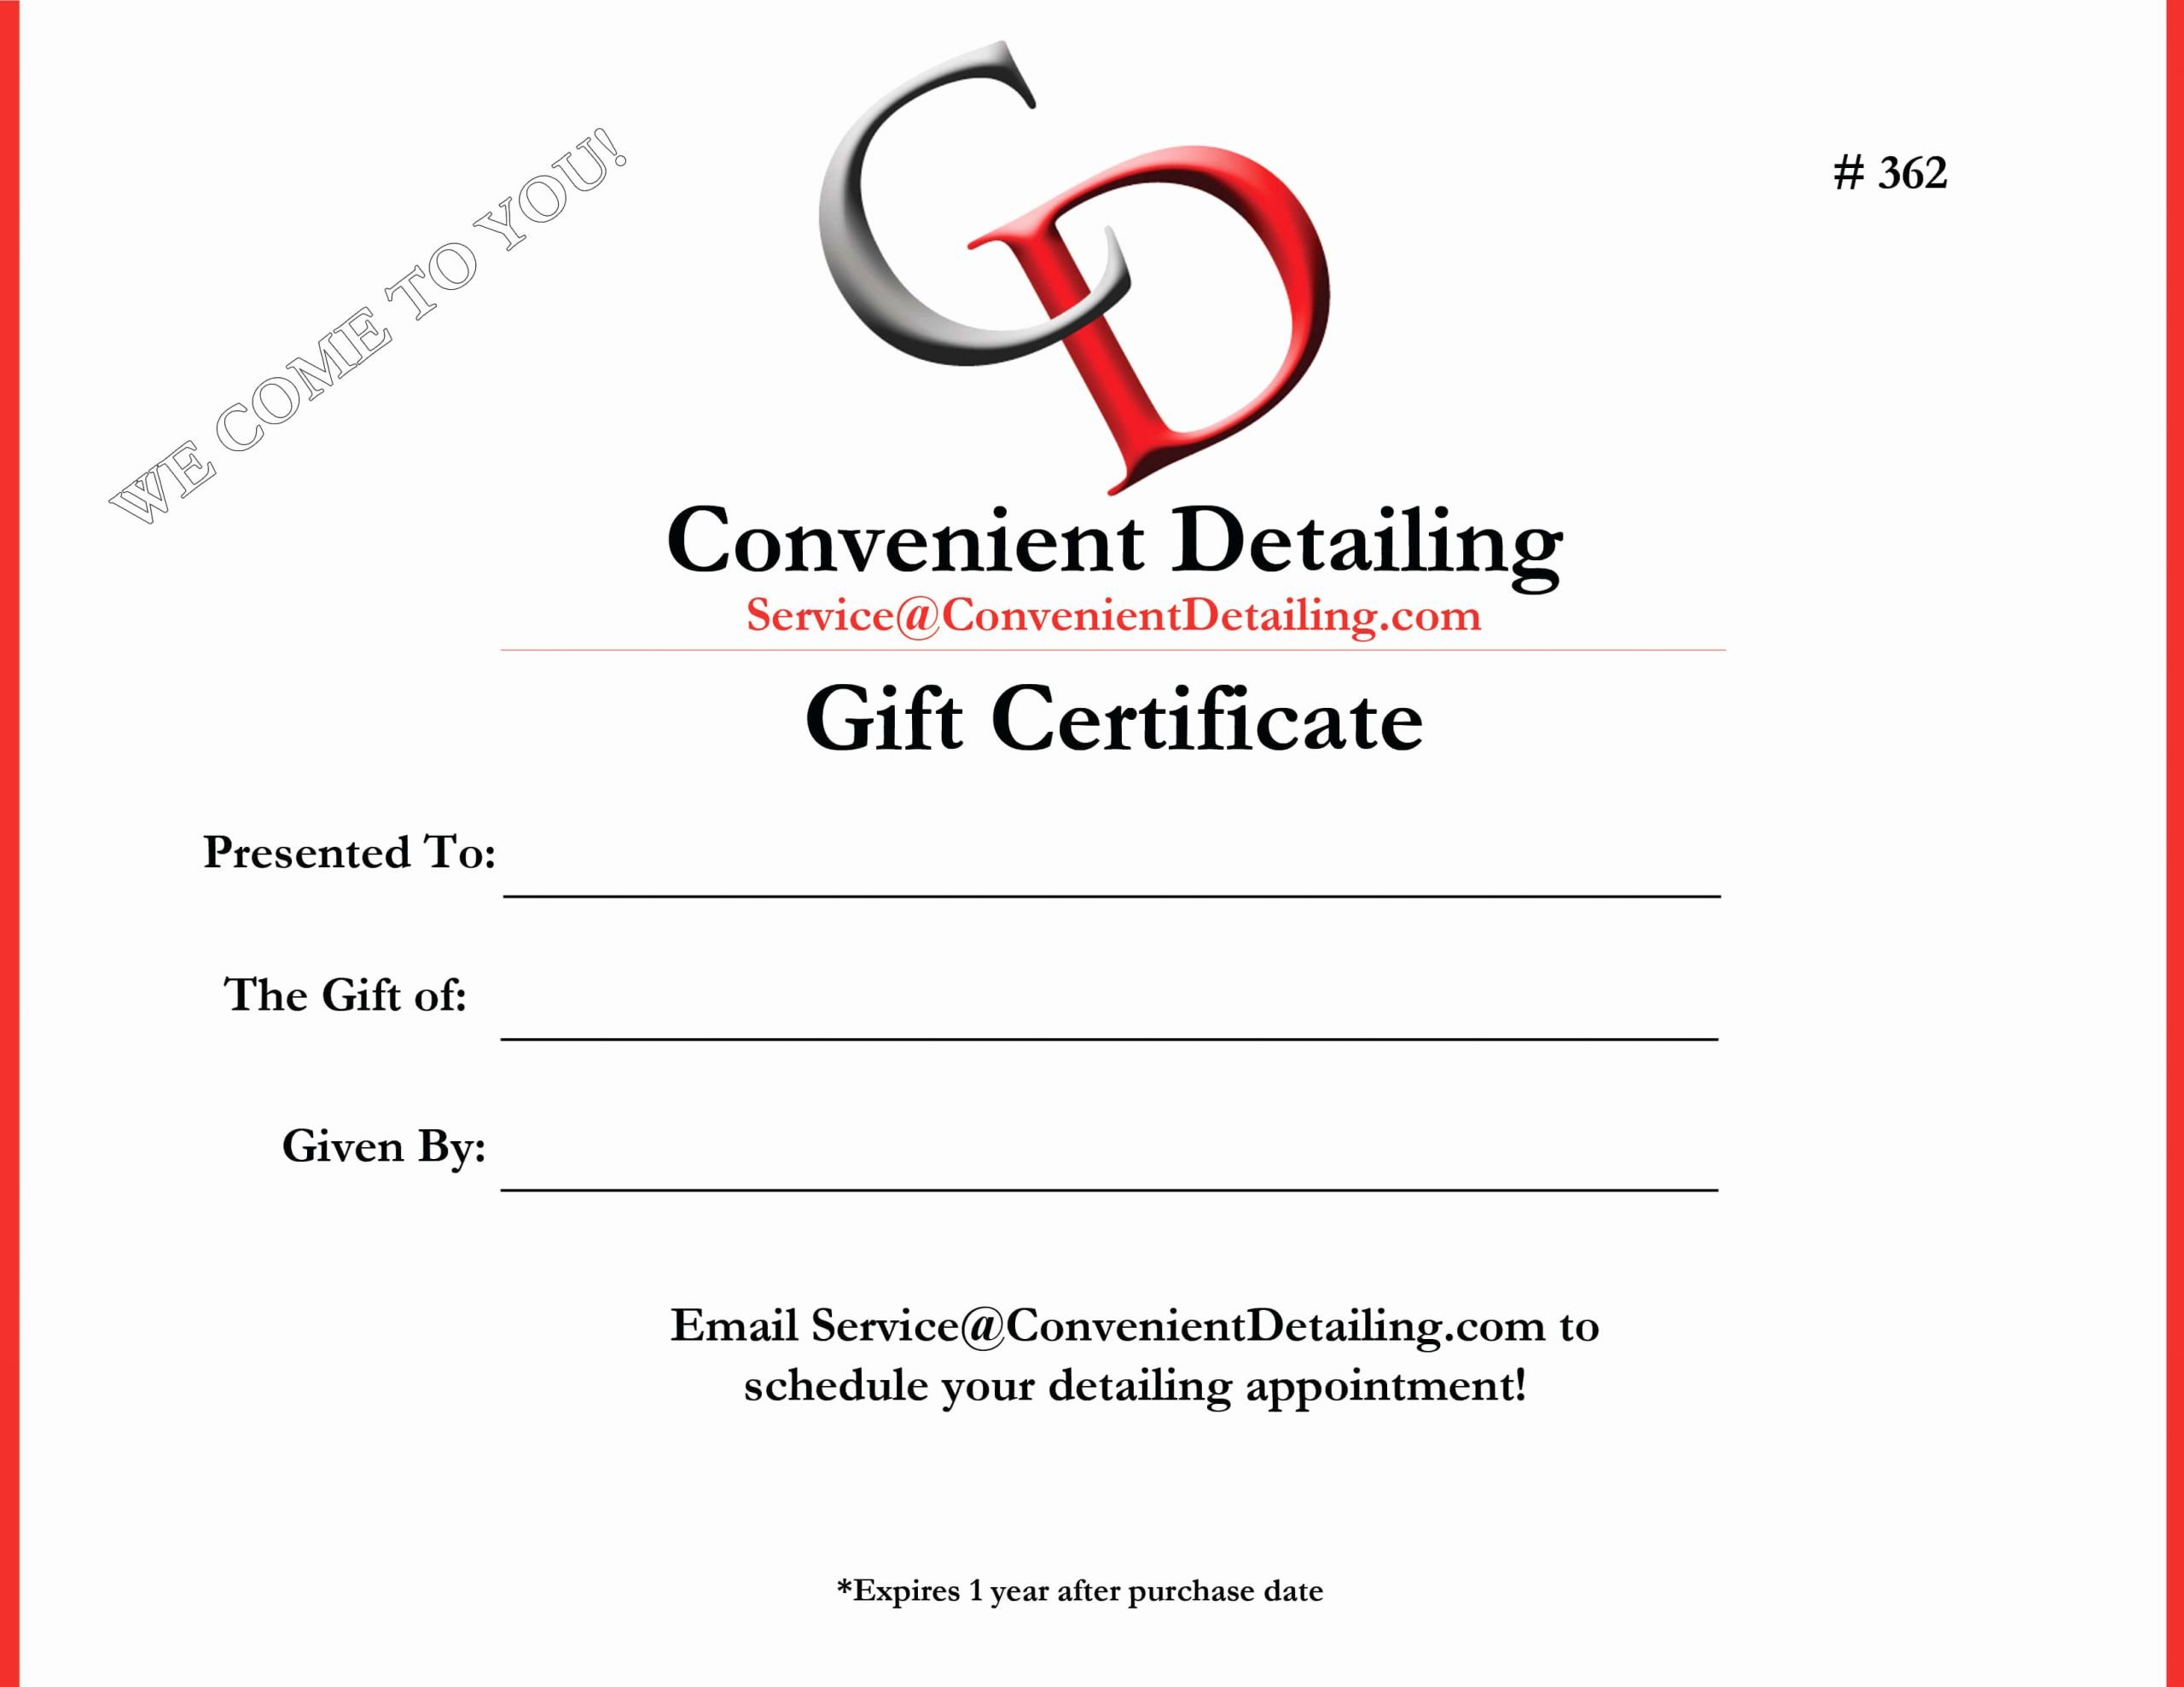 Auto Detailing Gift Certificate Template Best Of Auto Detailing Gift Certificate Nj Convenient Detailing